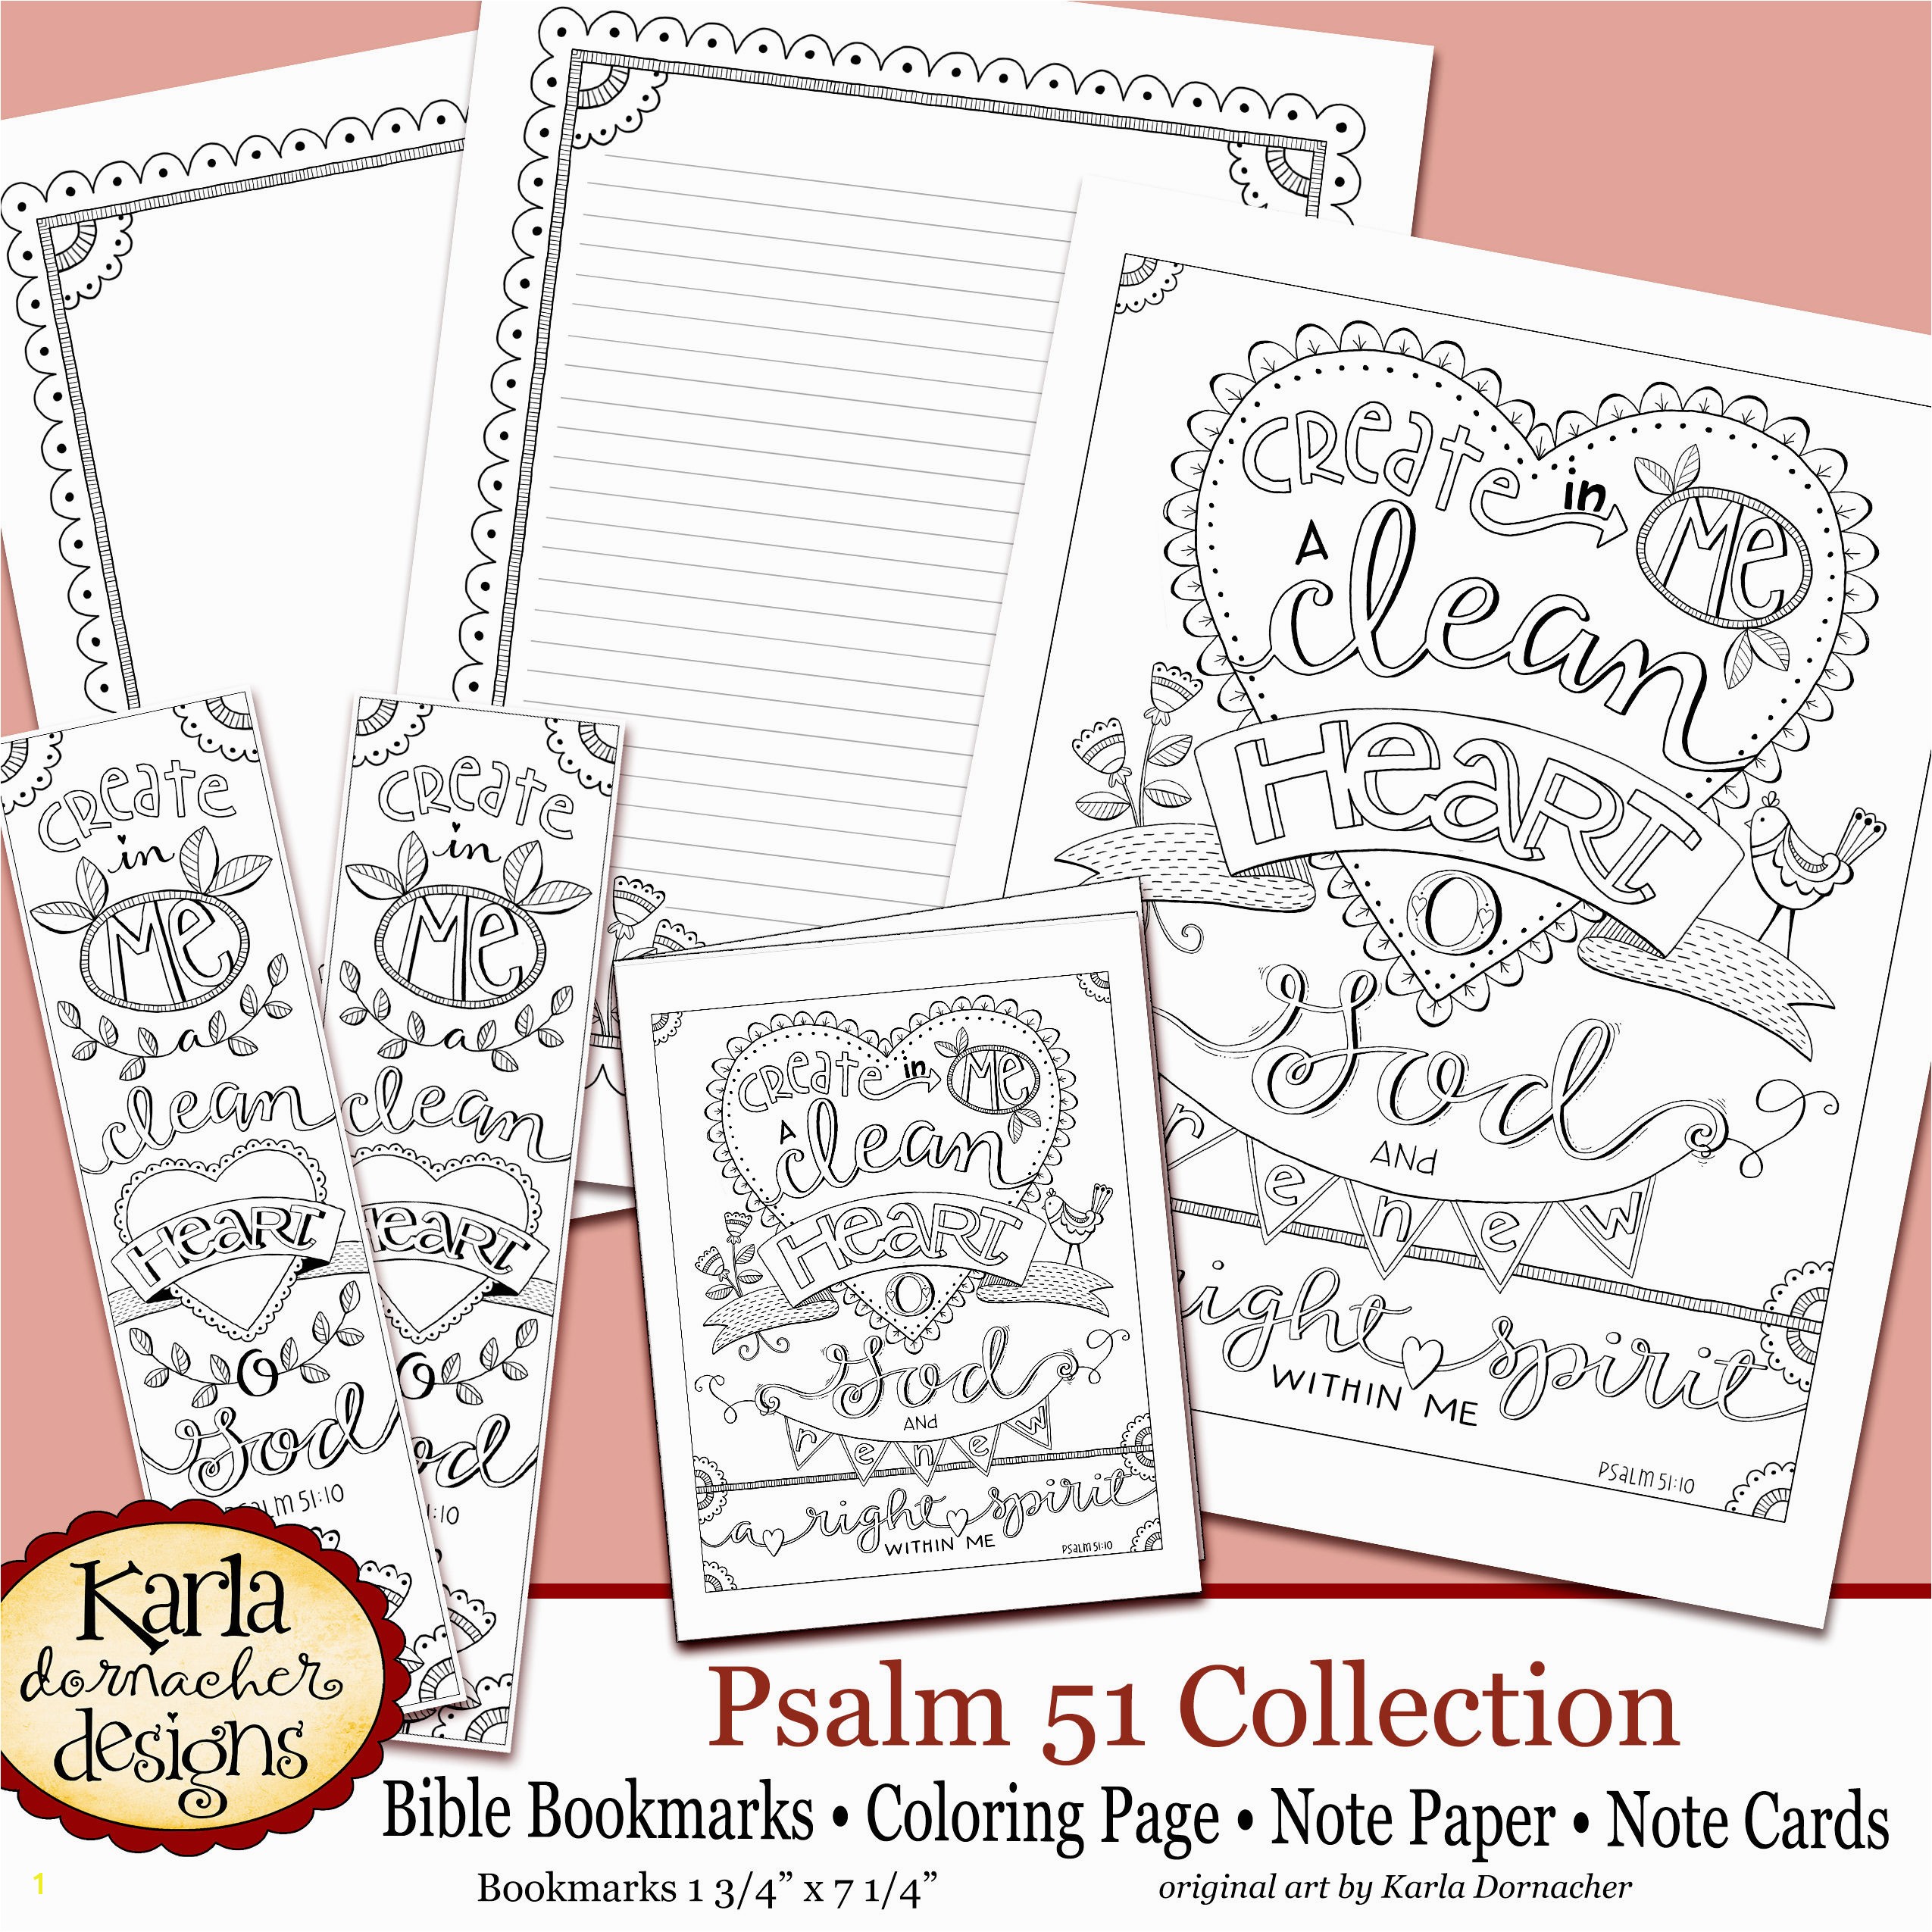 Psalm 51 Coloring Page Psalm 51 Create In Me A Clean Heart Bible Journaling Color